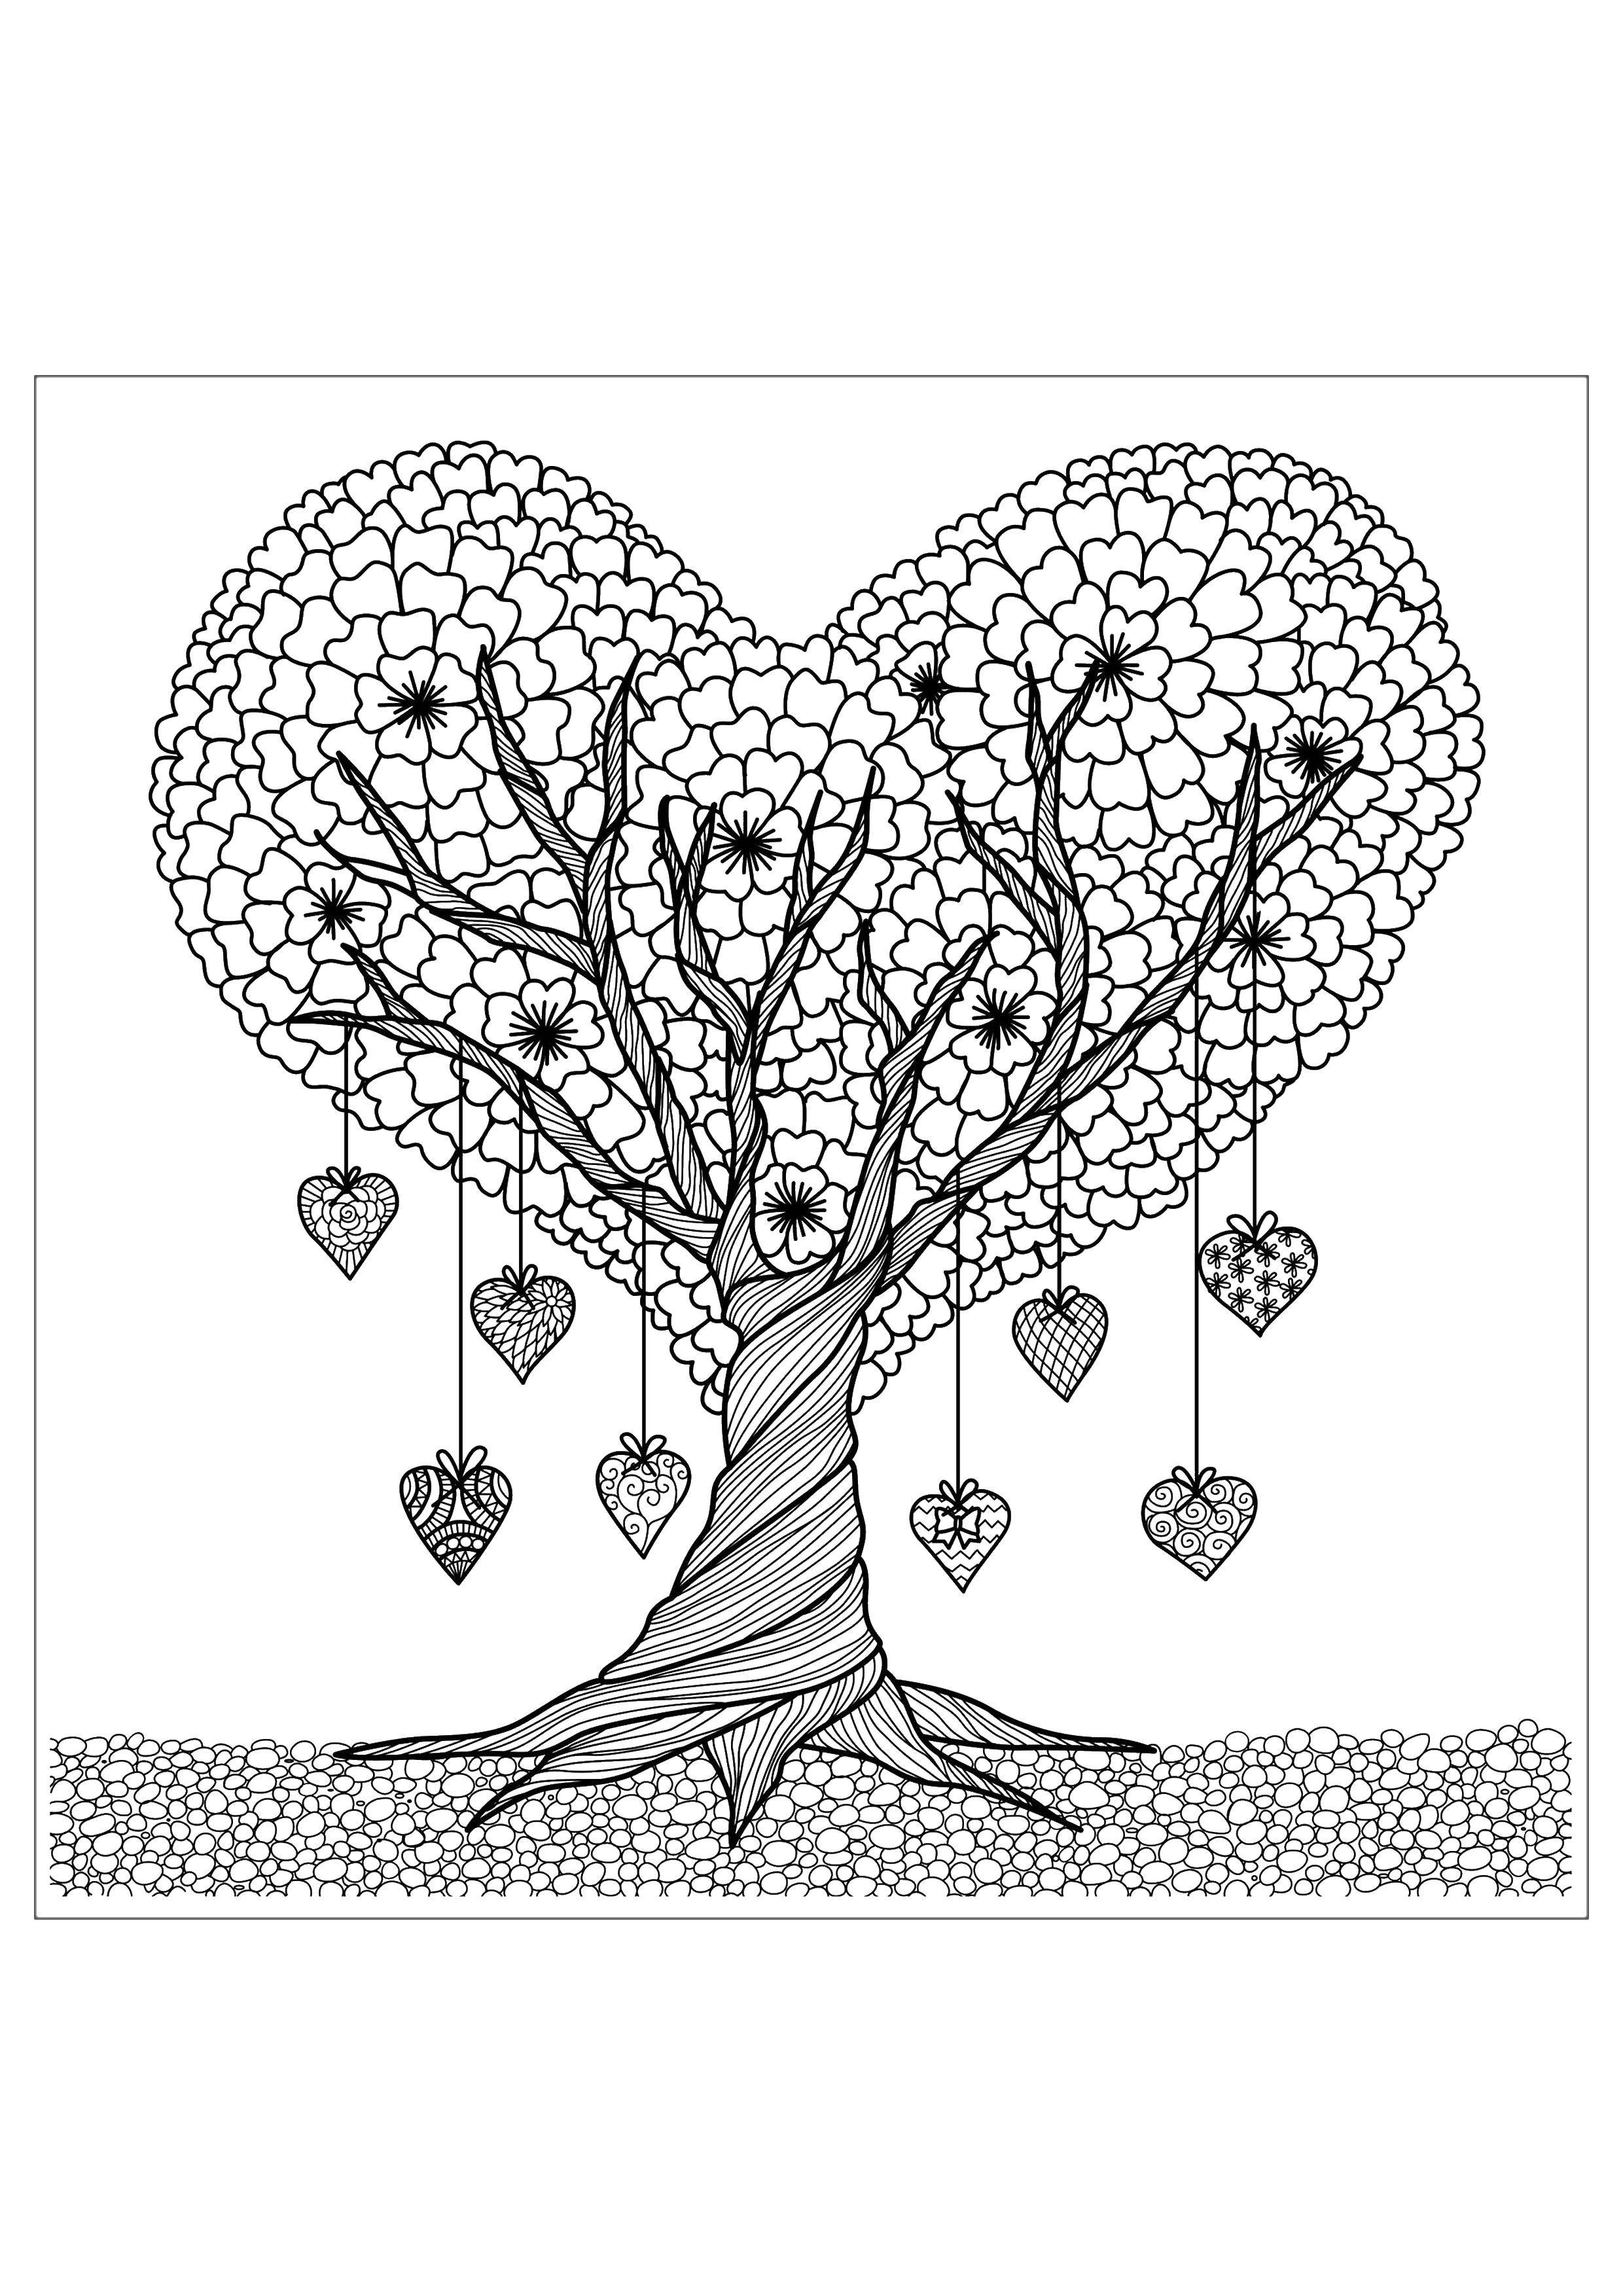 Coloring Tree heart. Category Sophisticated design. Tags:  The antistress, hearts.